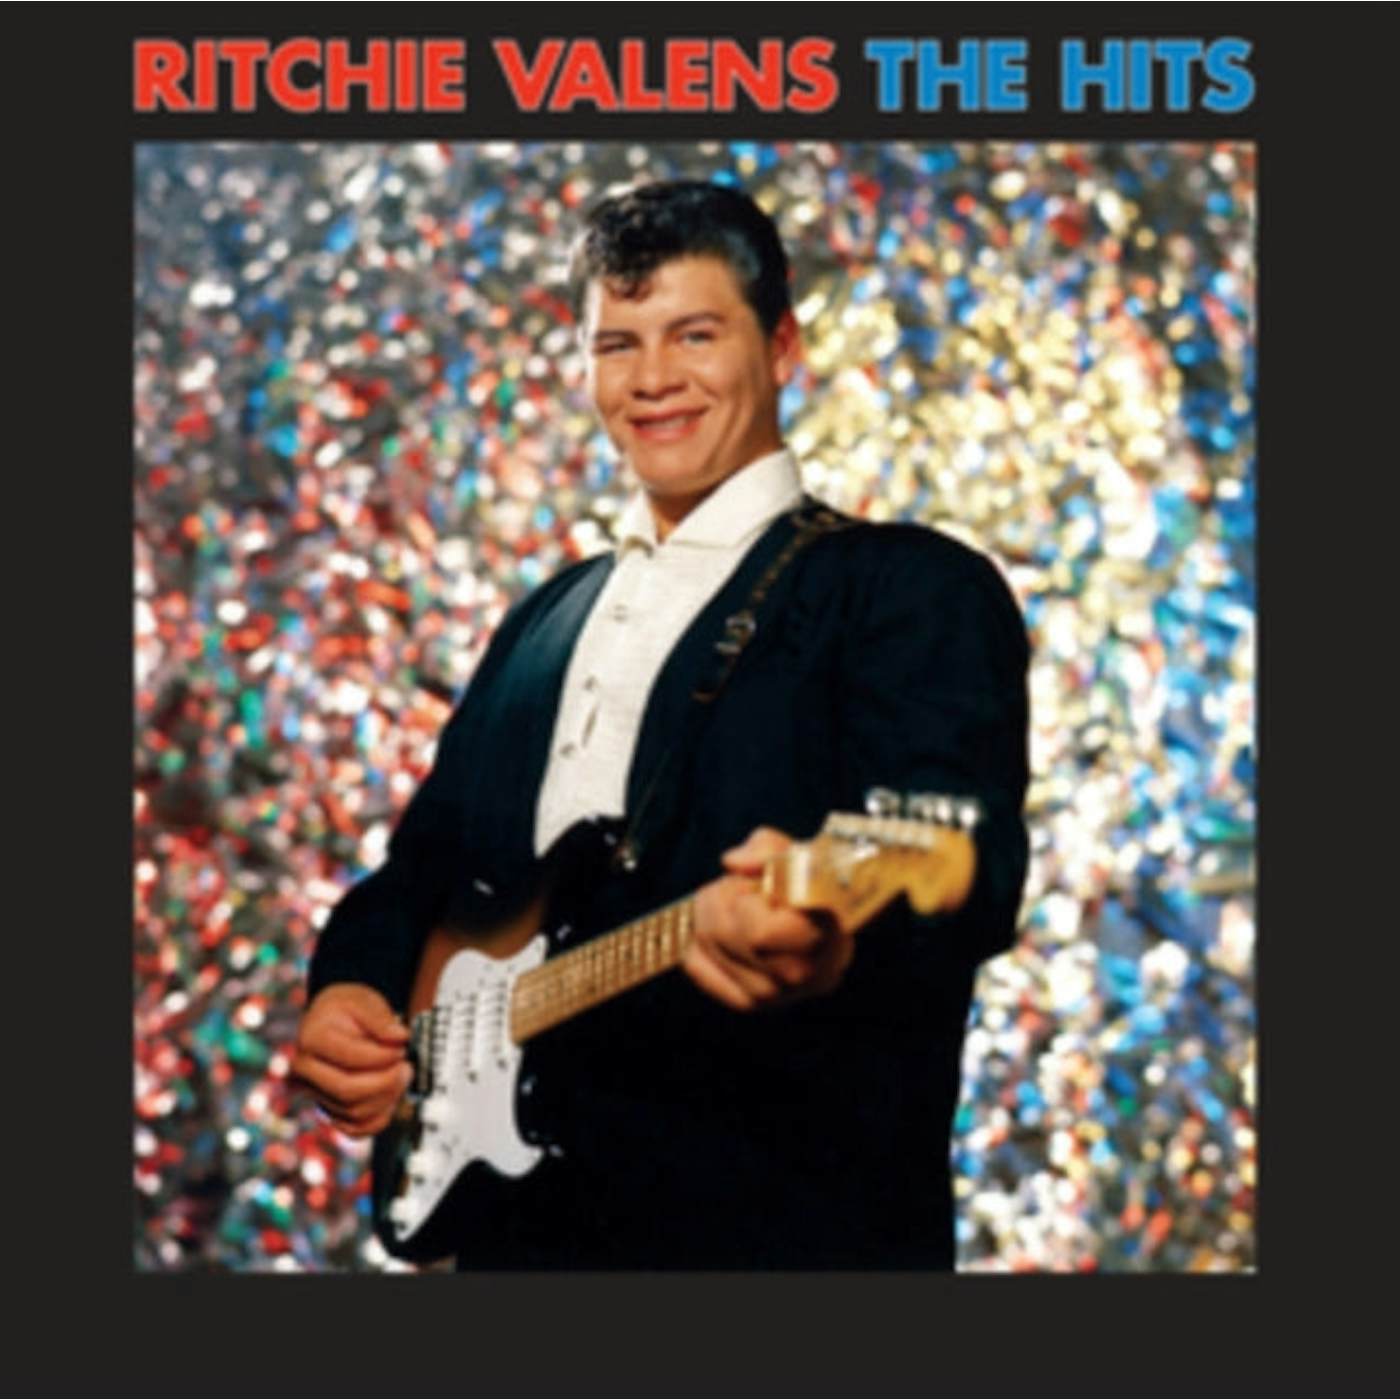 Ritchie Valens LP Vinyl Record - Ritchie Valens - The Hits (Limited Edition)